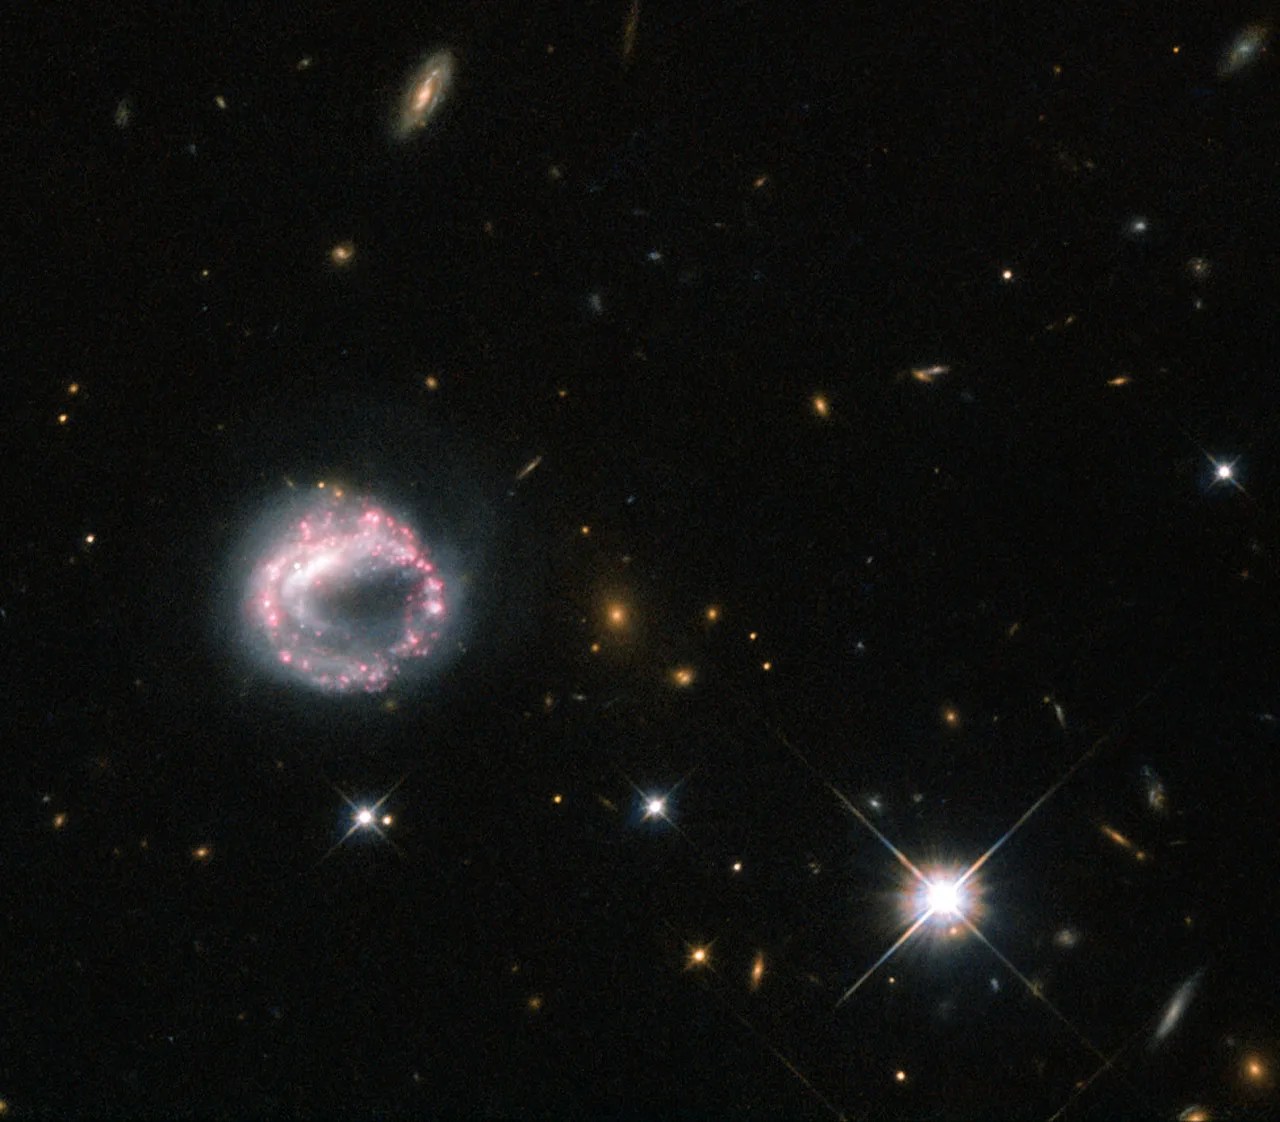 A white circular structure ringed with pink clusters of old stars, a bright star to the right and various distant galaxies